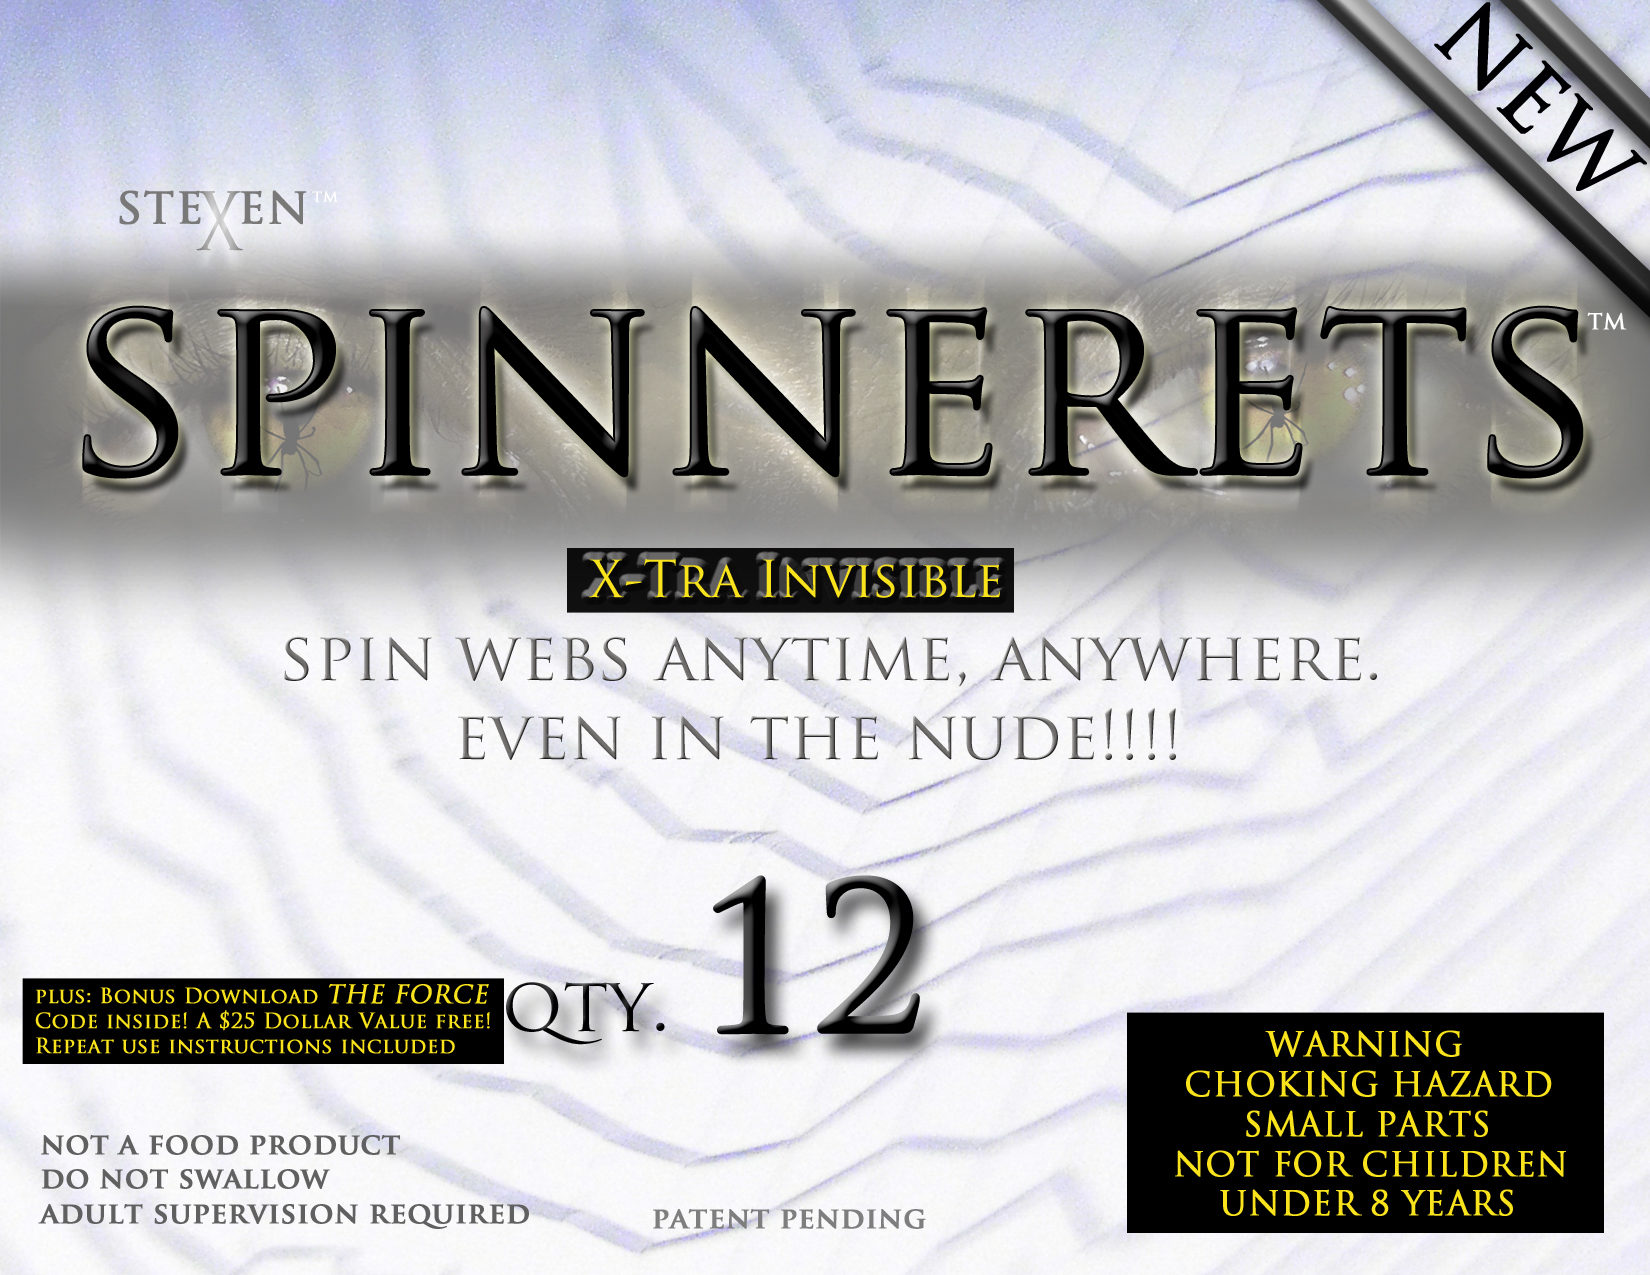 new-spinnerets-x-tra-invisible-pic